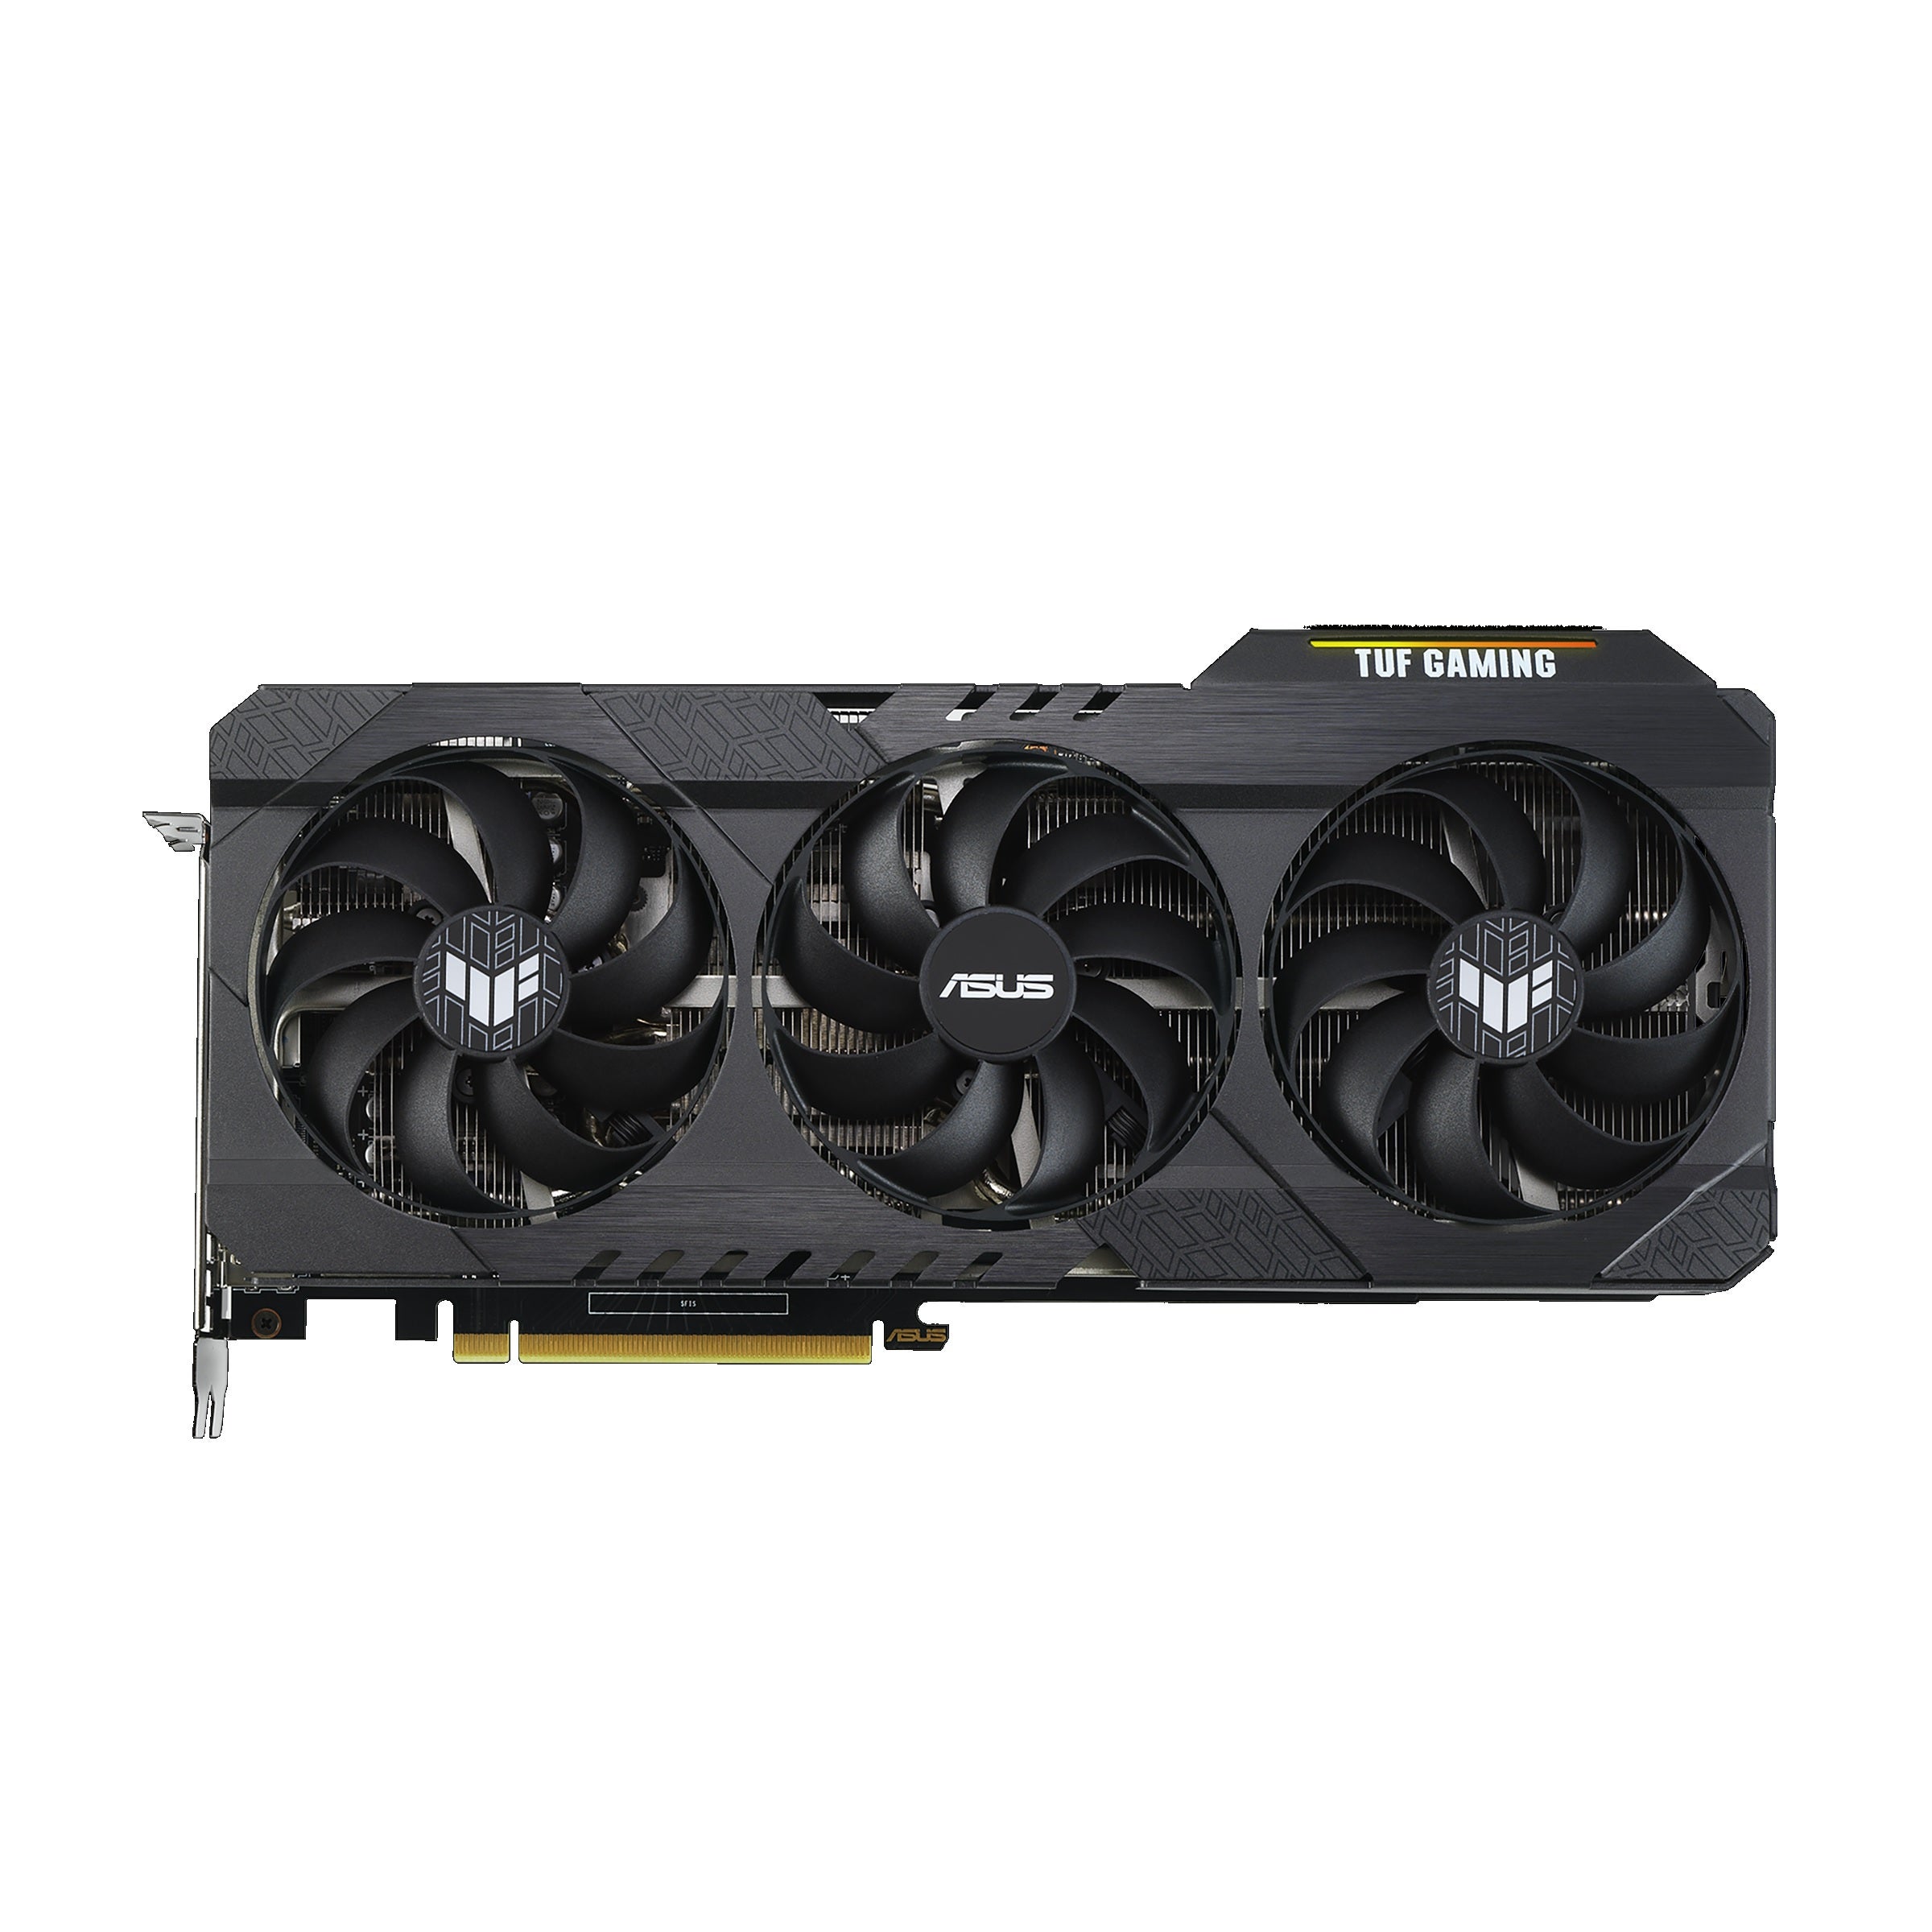 Asus TUF Gaming GeForce RTX 3060 V2 OC Edition Graphics Card